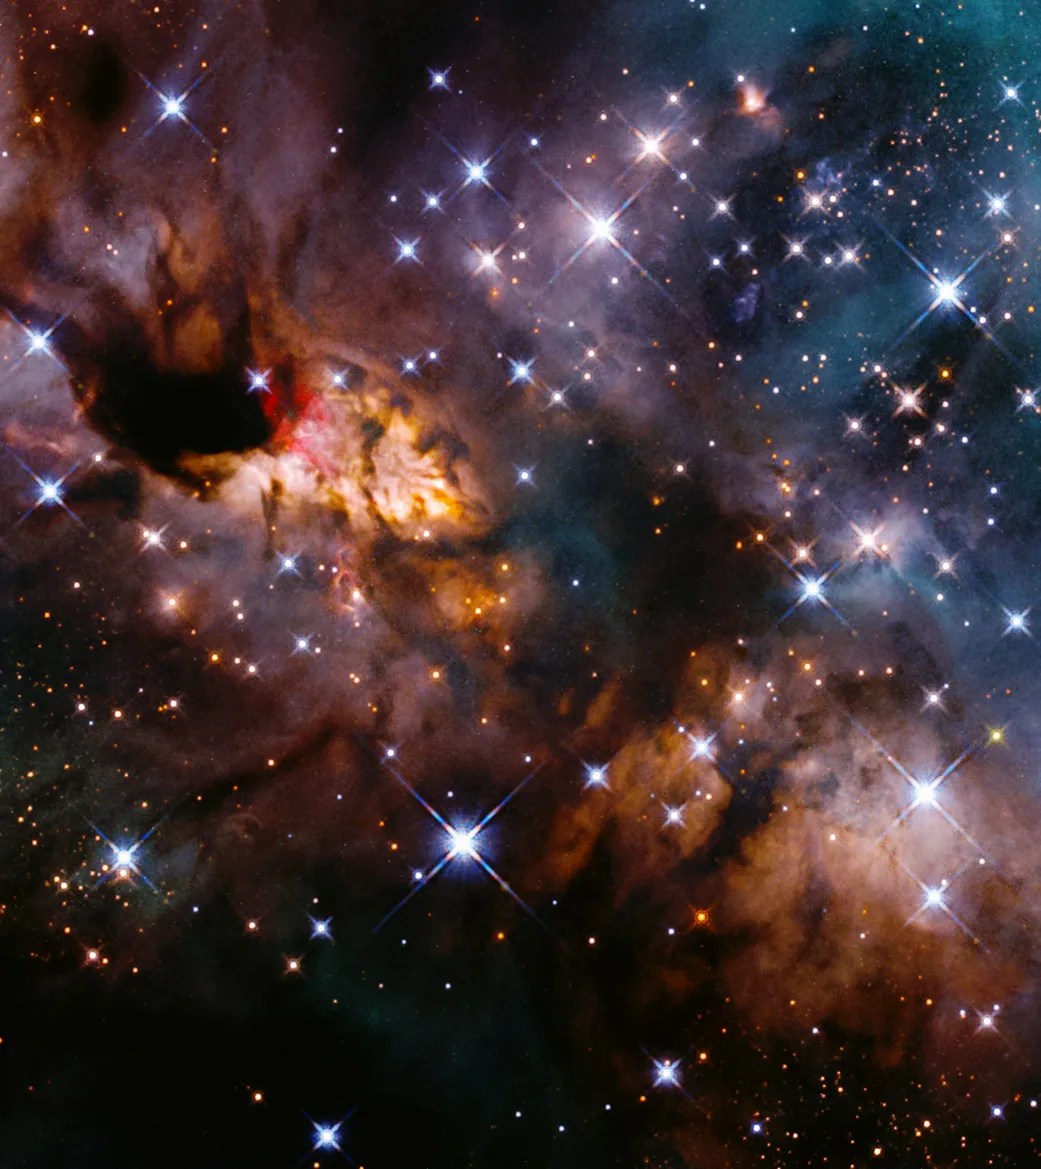 Dark dust lanes and clumps block the light from bright white, red, and rust-colored clouds that stretch diagonally across the image. blue-white stars fill the upper right